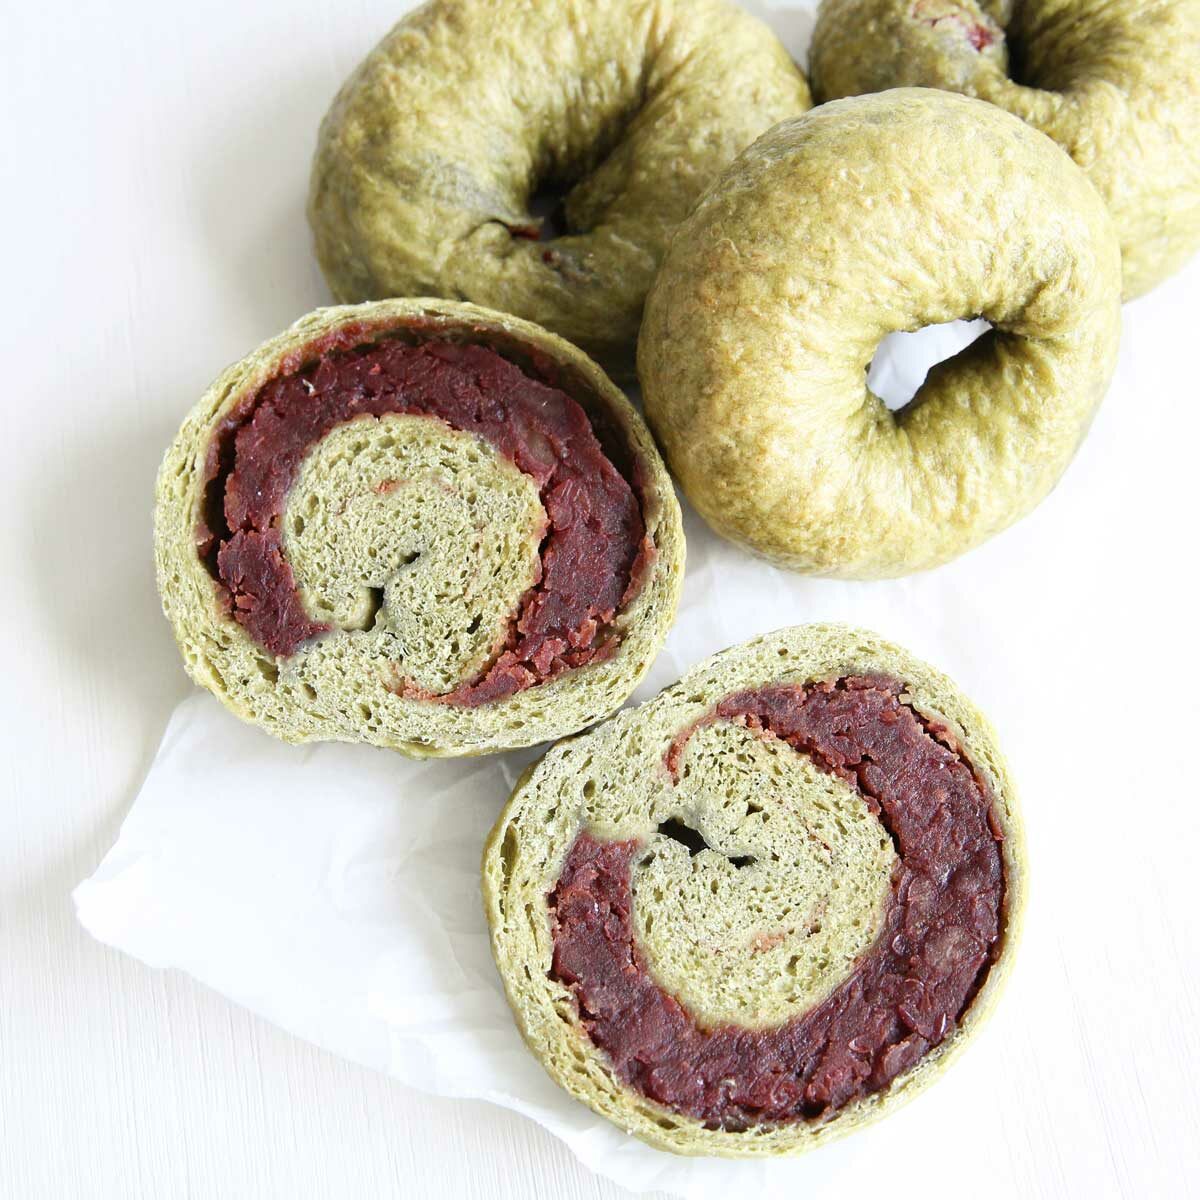 Homemade Applesauce Matcha Bagels with Red Bean Paste Filling - Matcha Bagels